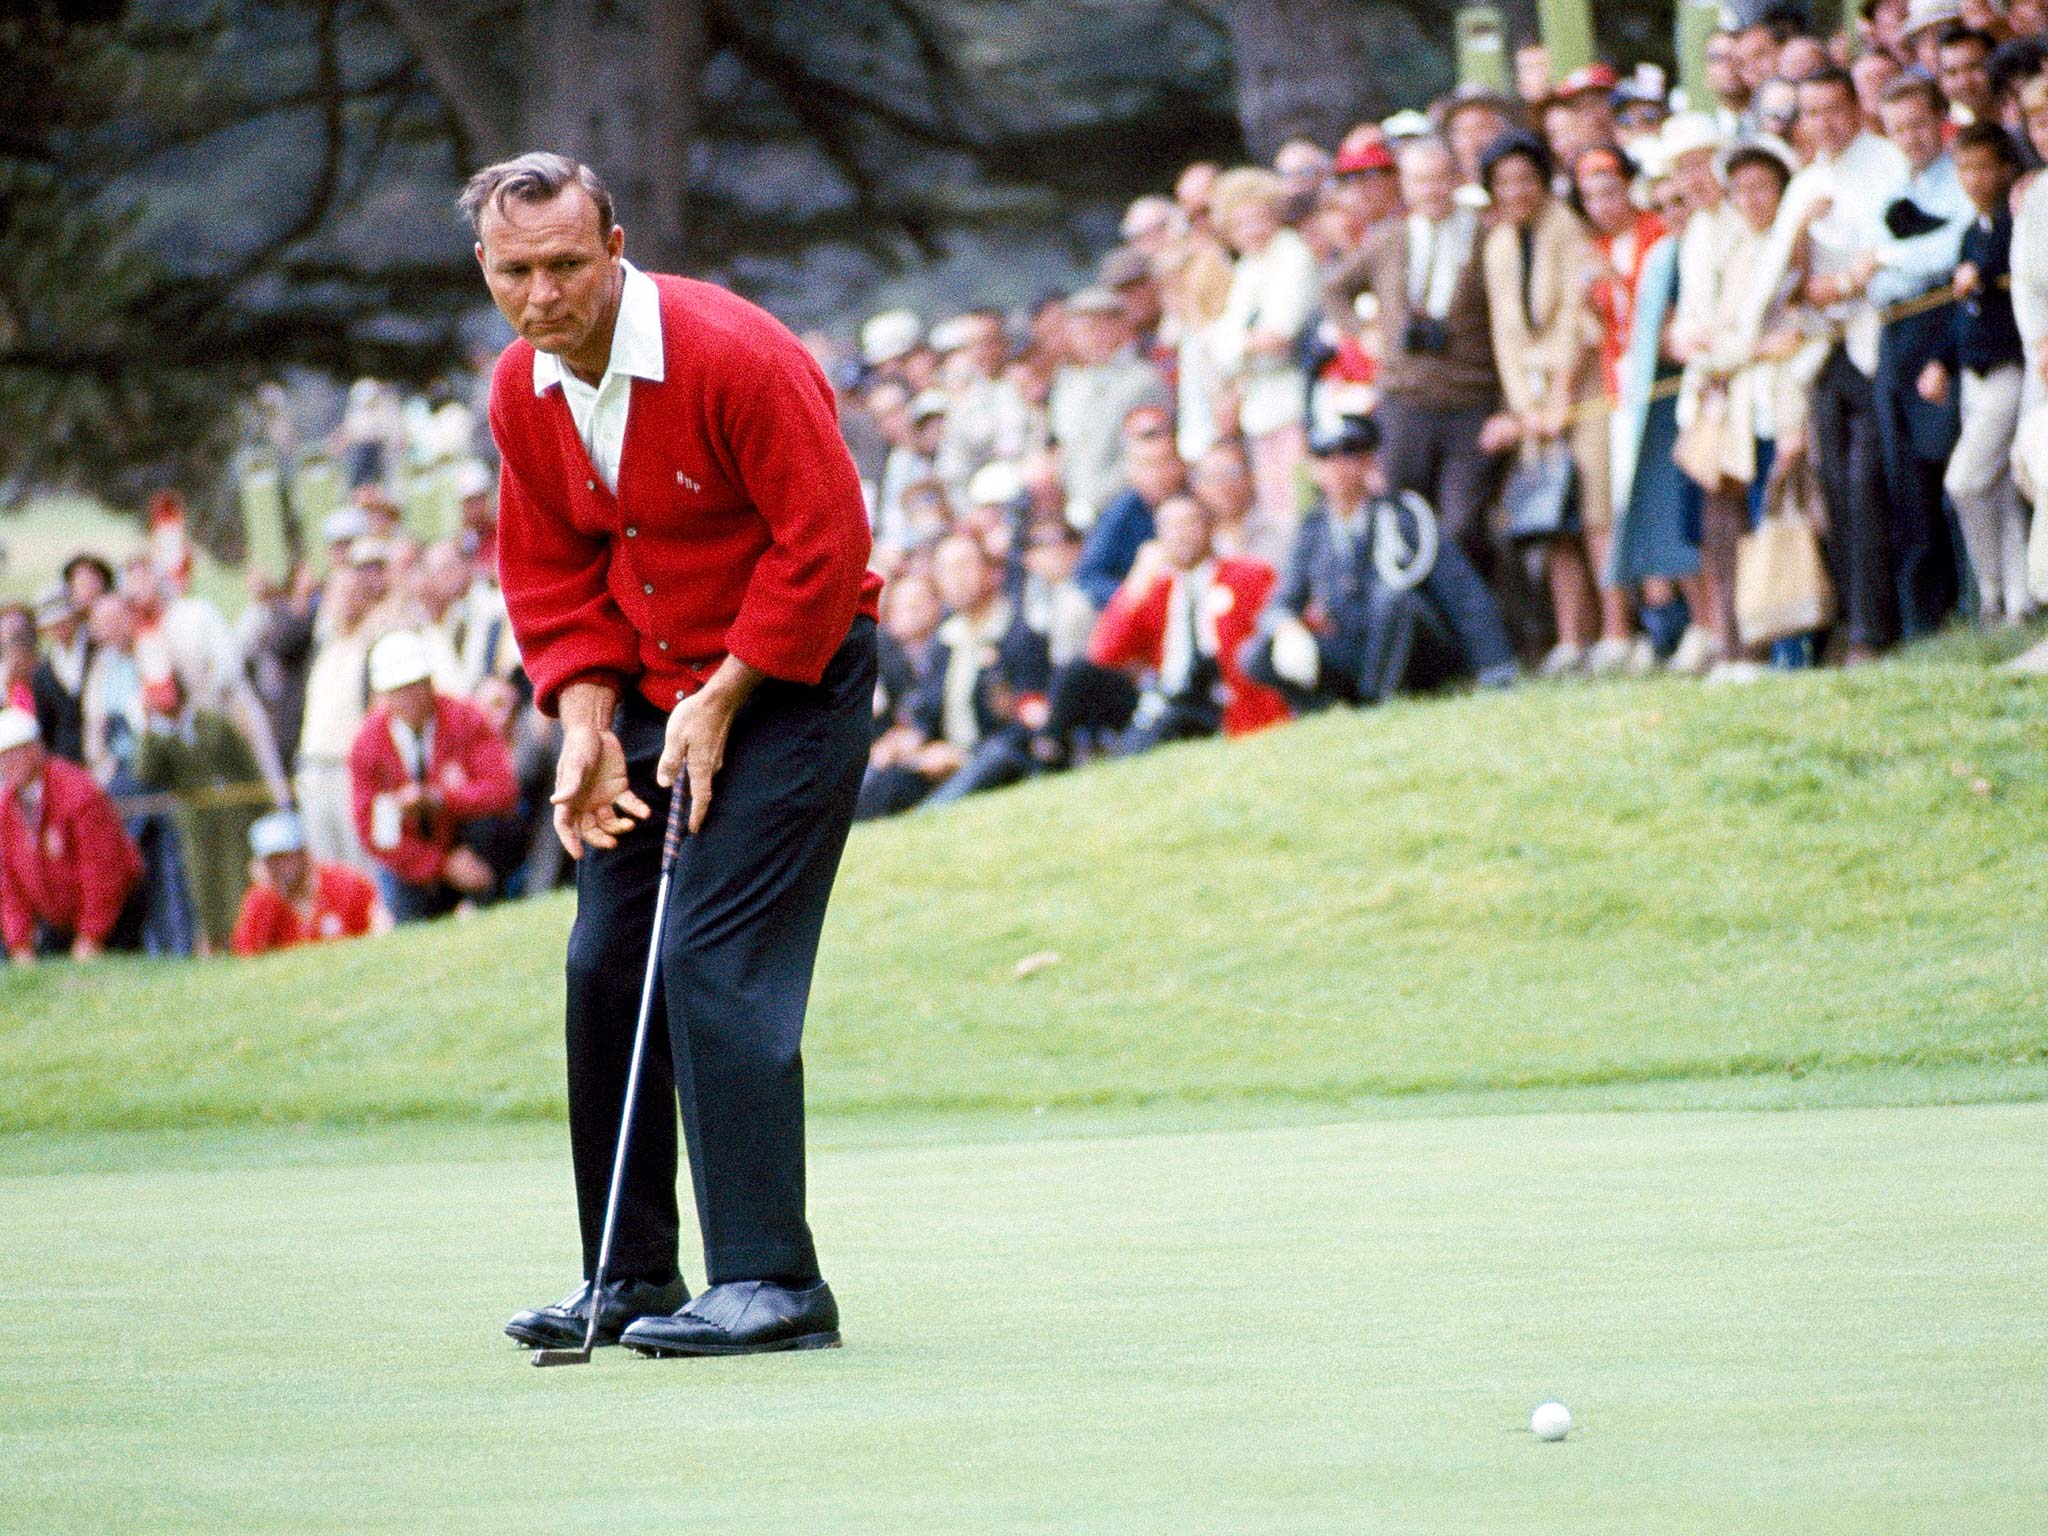 Arnold Palmer's long game was enviable but he was also a master tactician